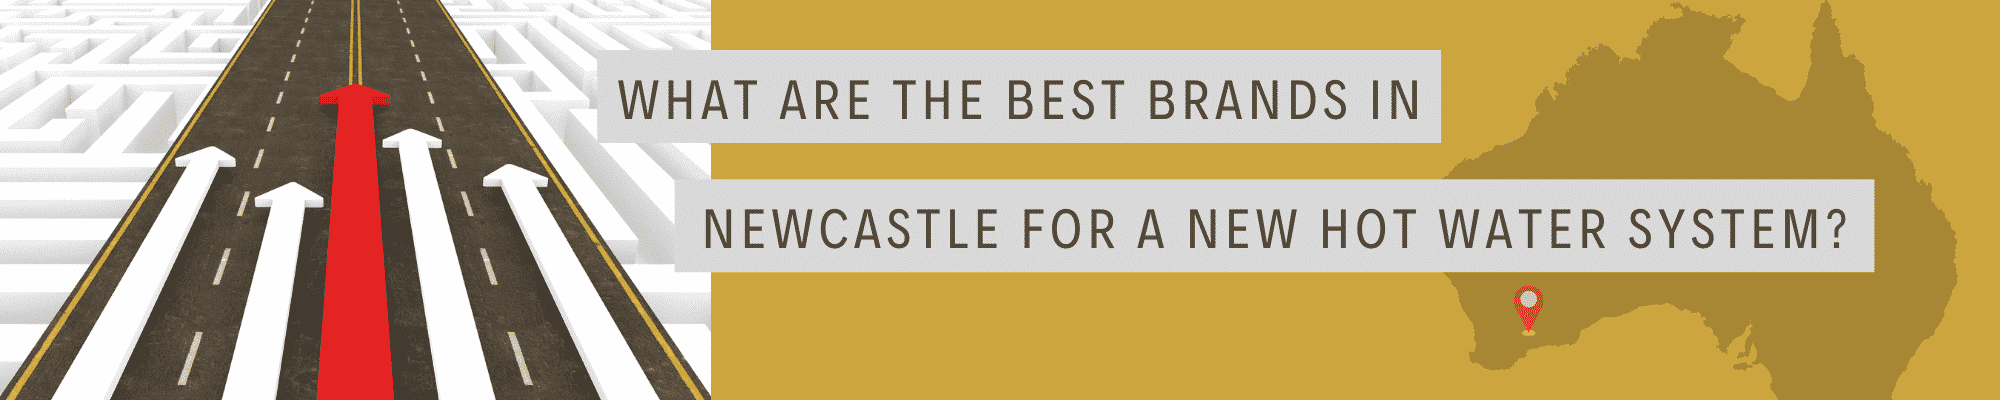 What are the best brands in Newcastle for a new hot water system?